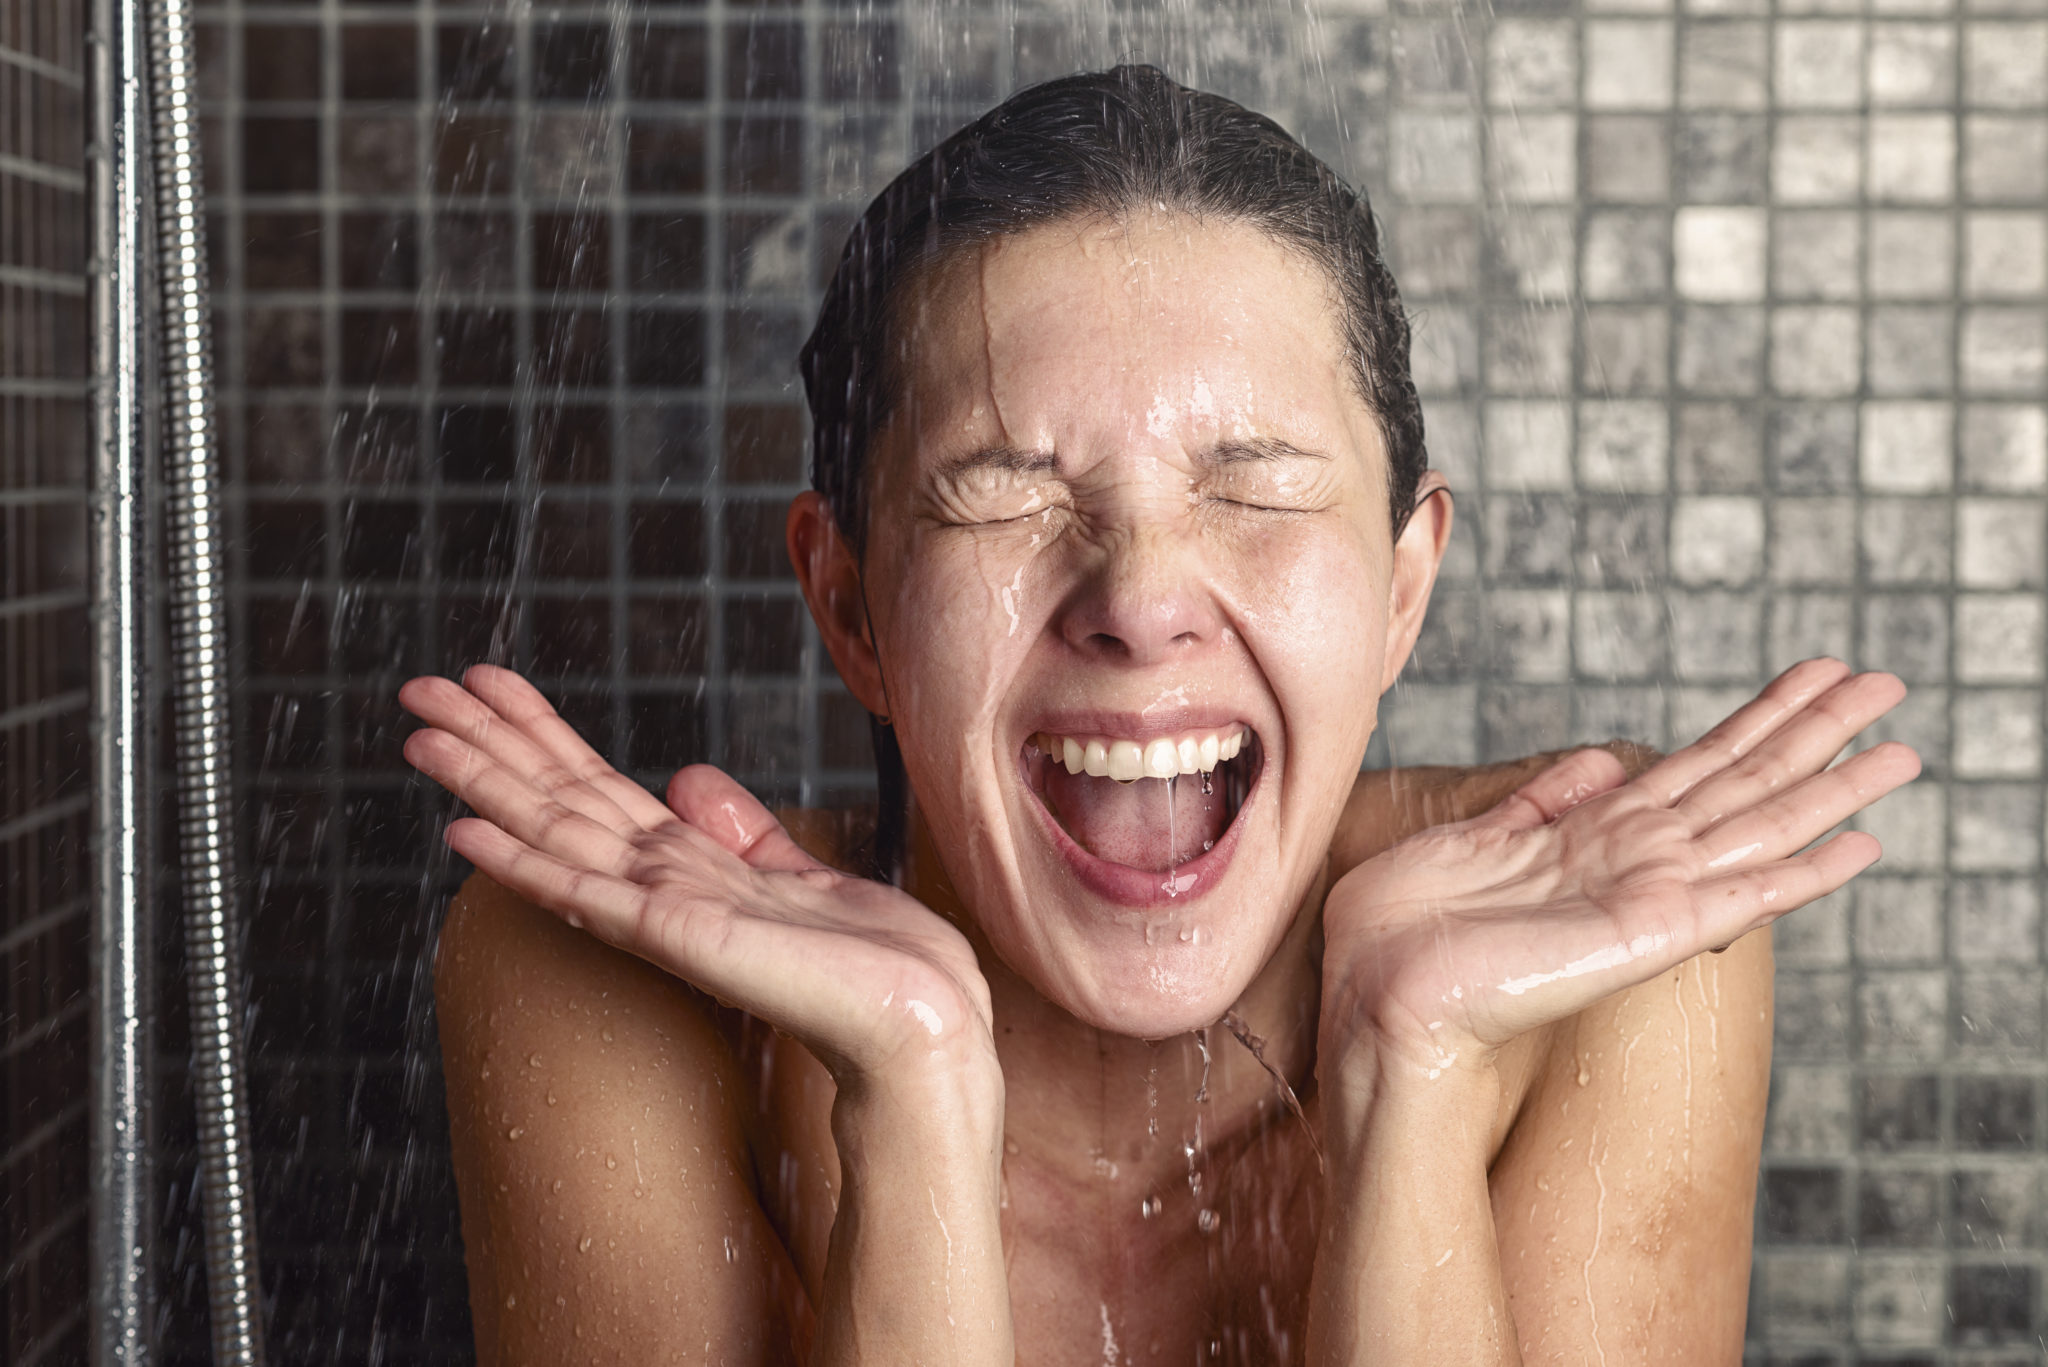 Young woman reacting in shock to hot or cold shower water